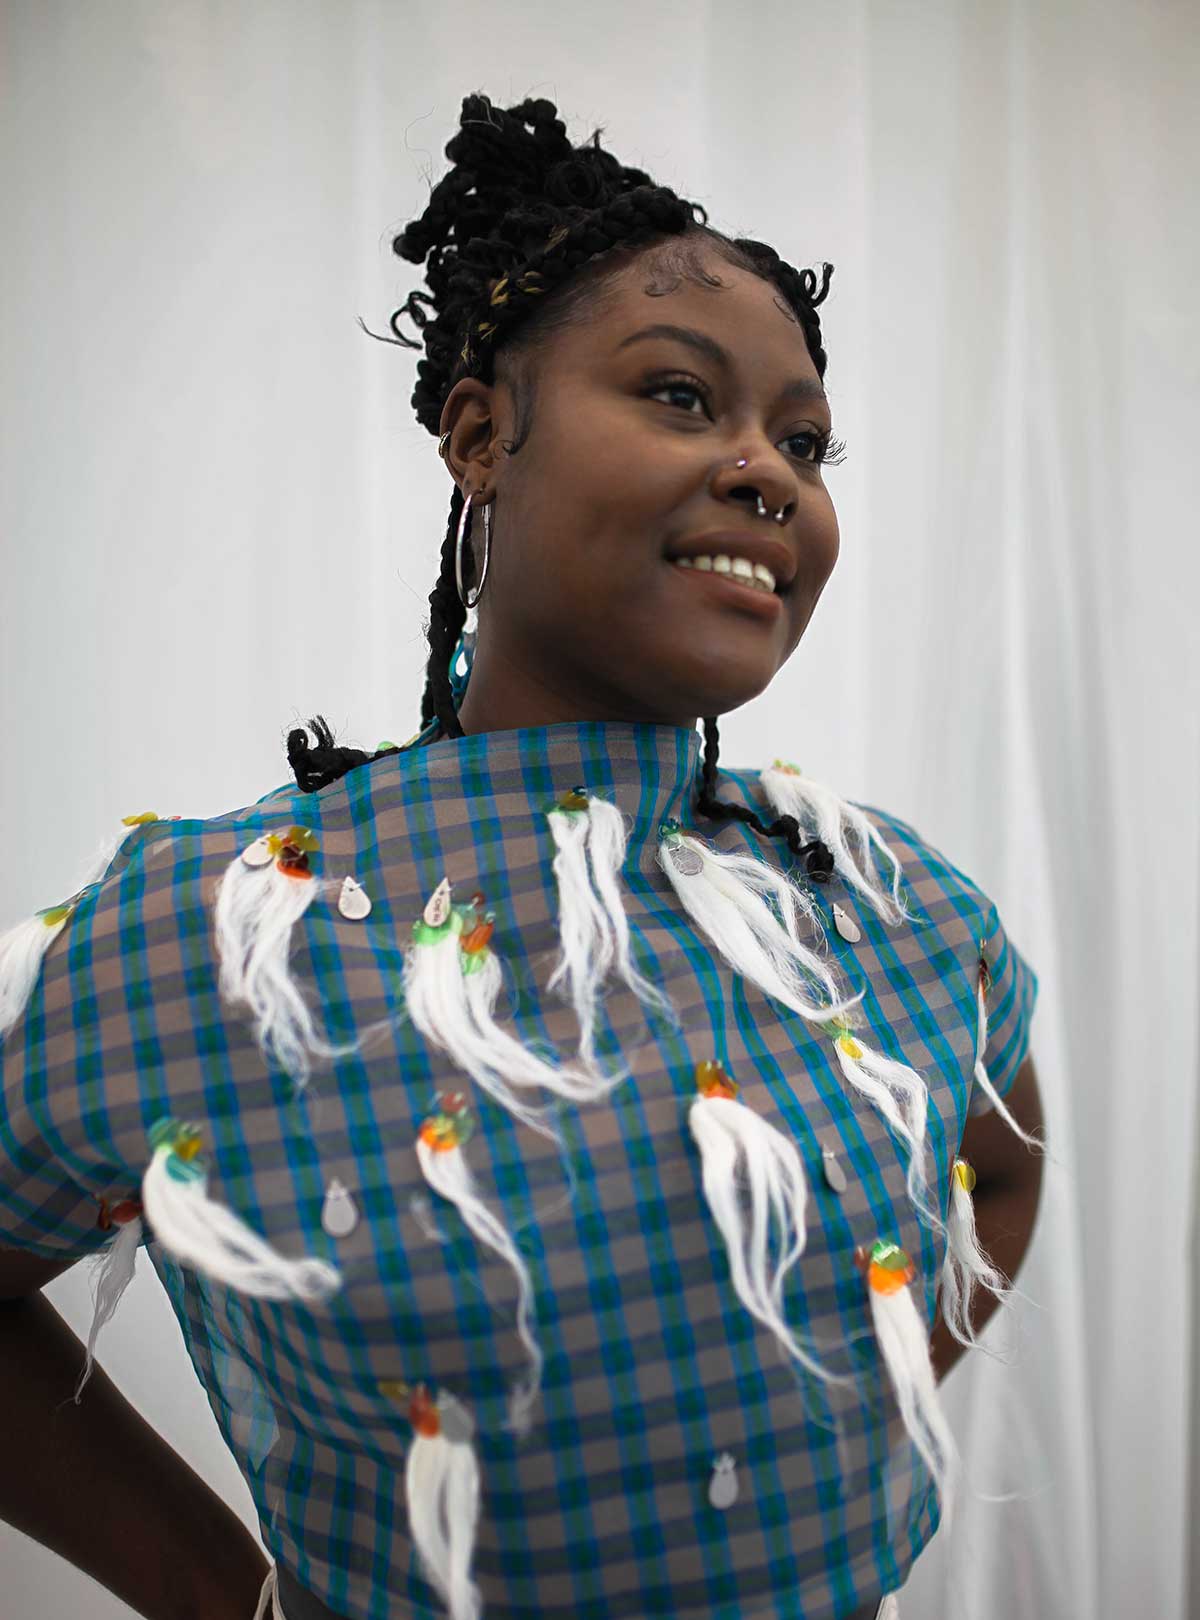 ReGo participant wearing a top designed by CQ Studio - Photography by Eugenie Flochel